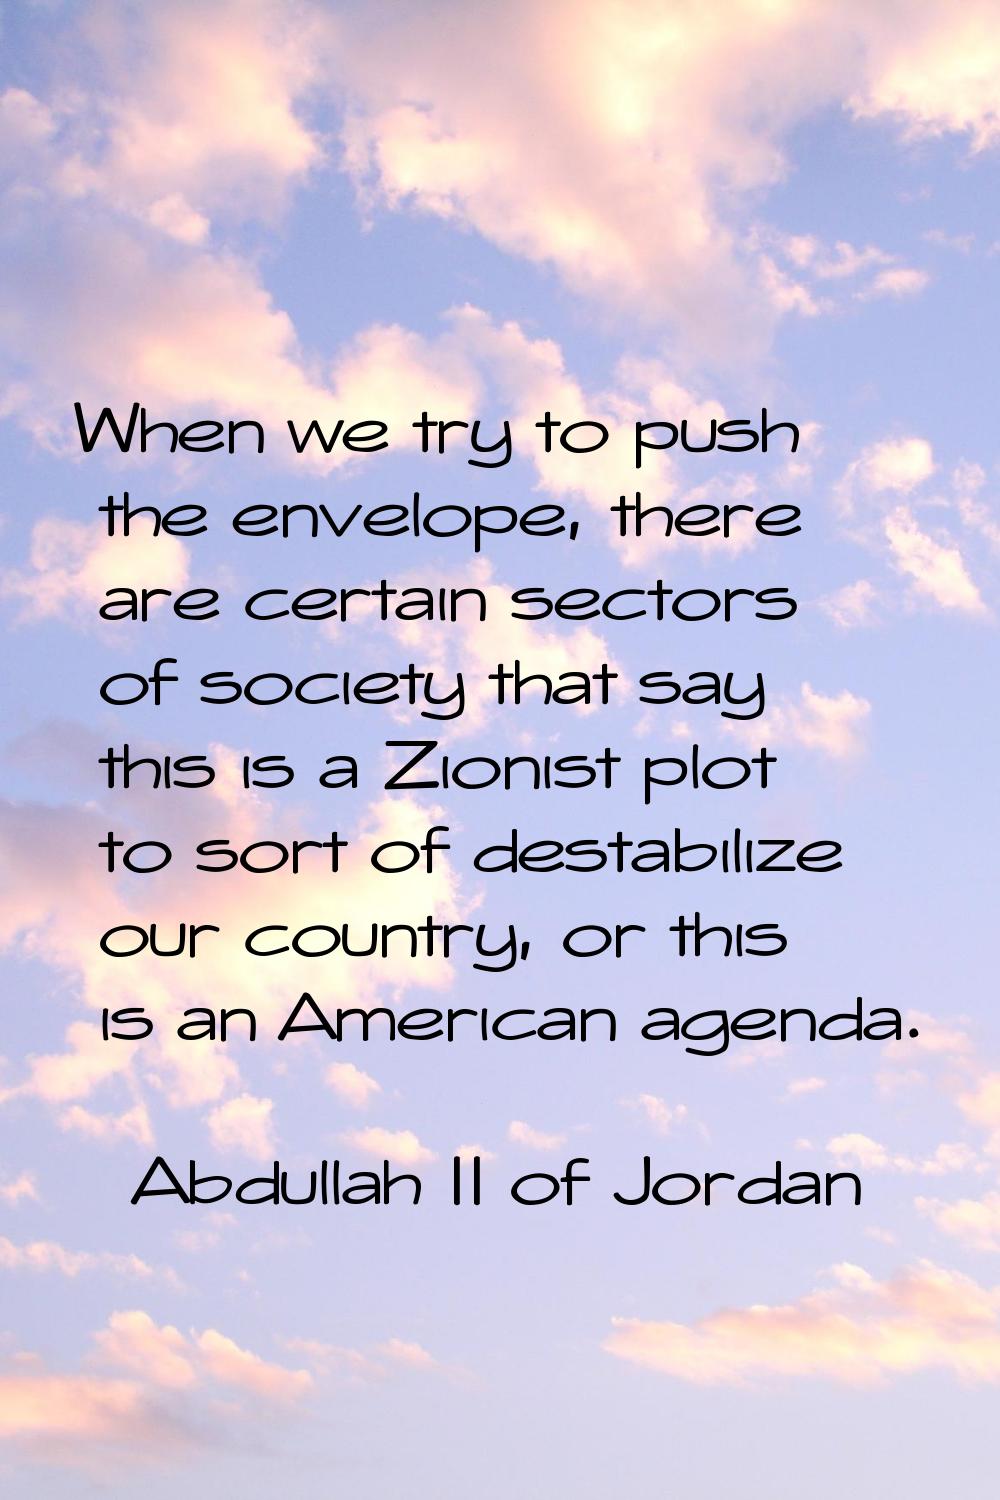 When we try to push the envelope, there are certain sectors of society that say this is a Zionist p